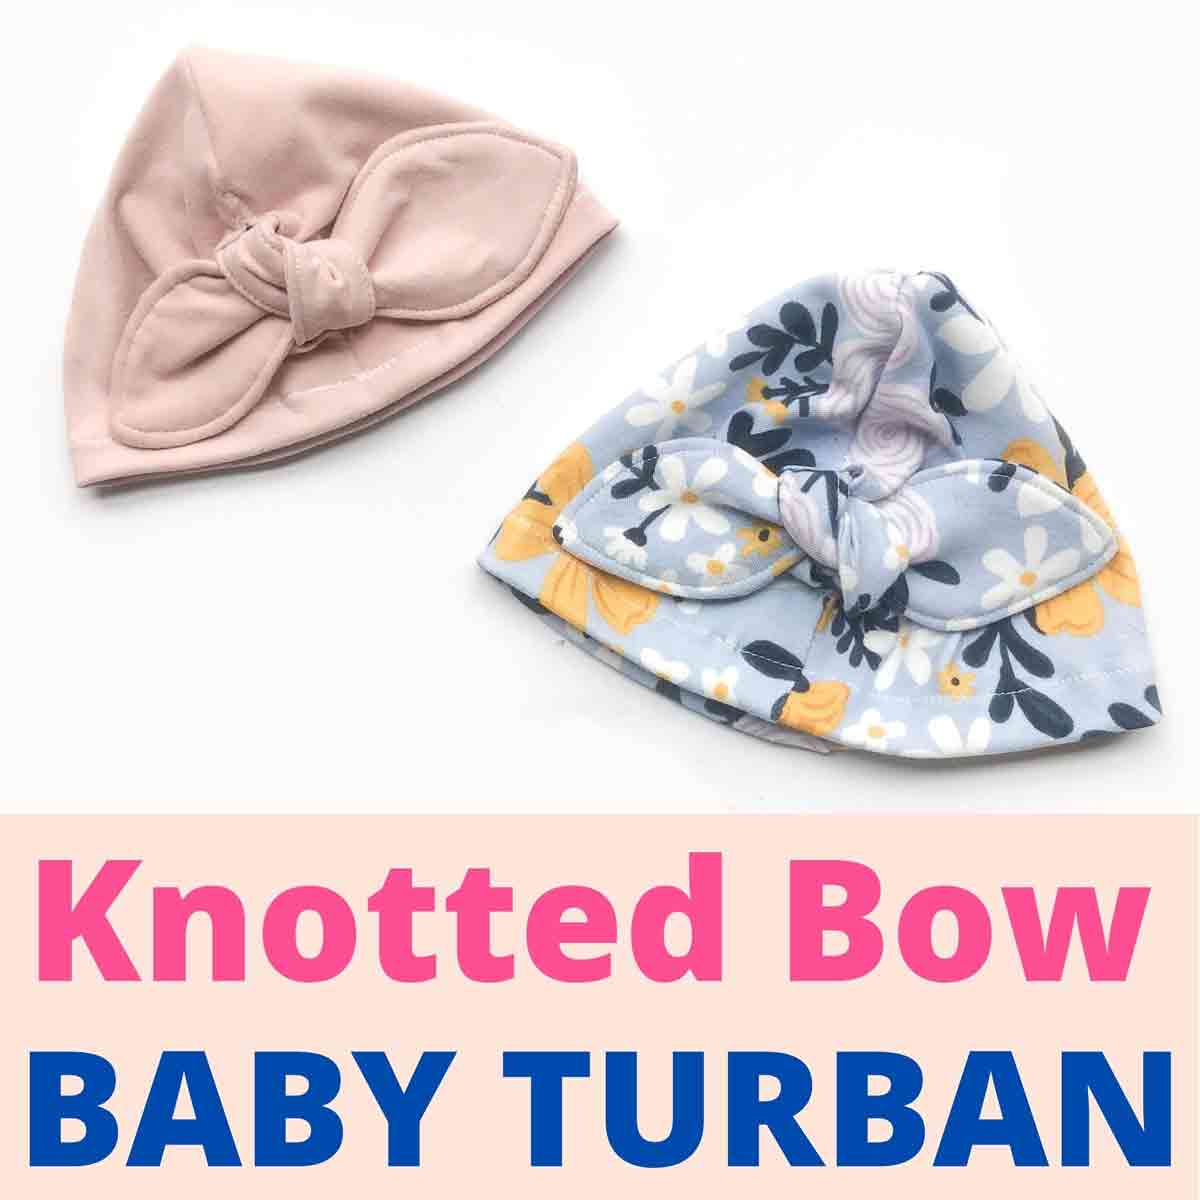 Knotted Bow Baby Turban Featured Image